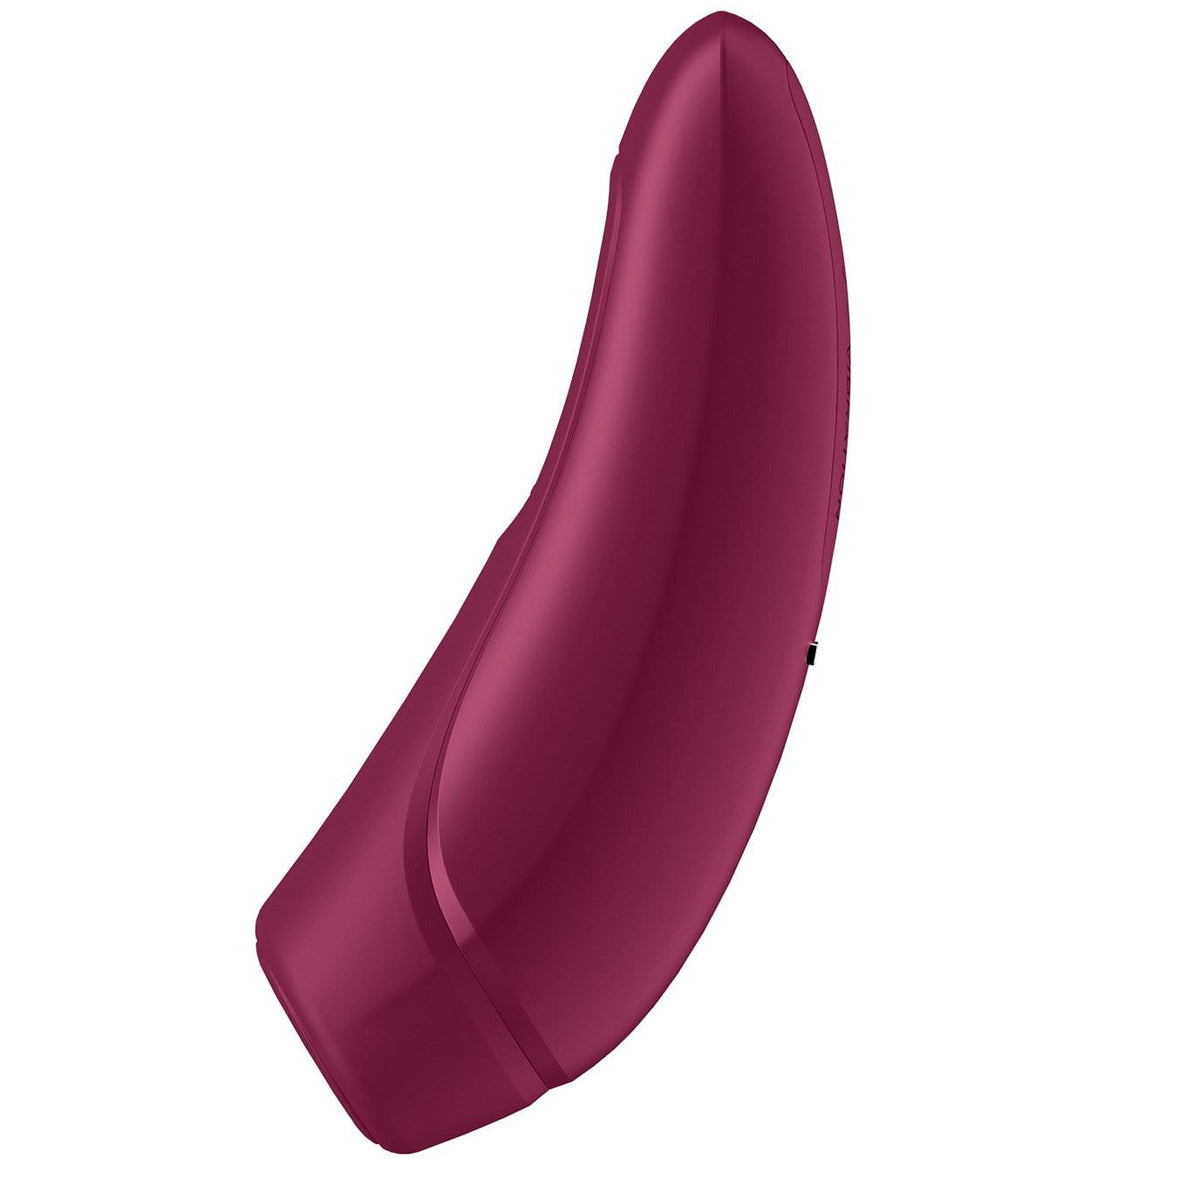 *FREE GIFT* Satisfyer - Curvy 1+ App-Controlled Clitoral Air Stimulator Vibrator (Rose Red) STF1133 CherryAffairs